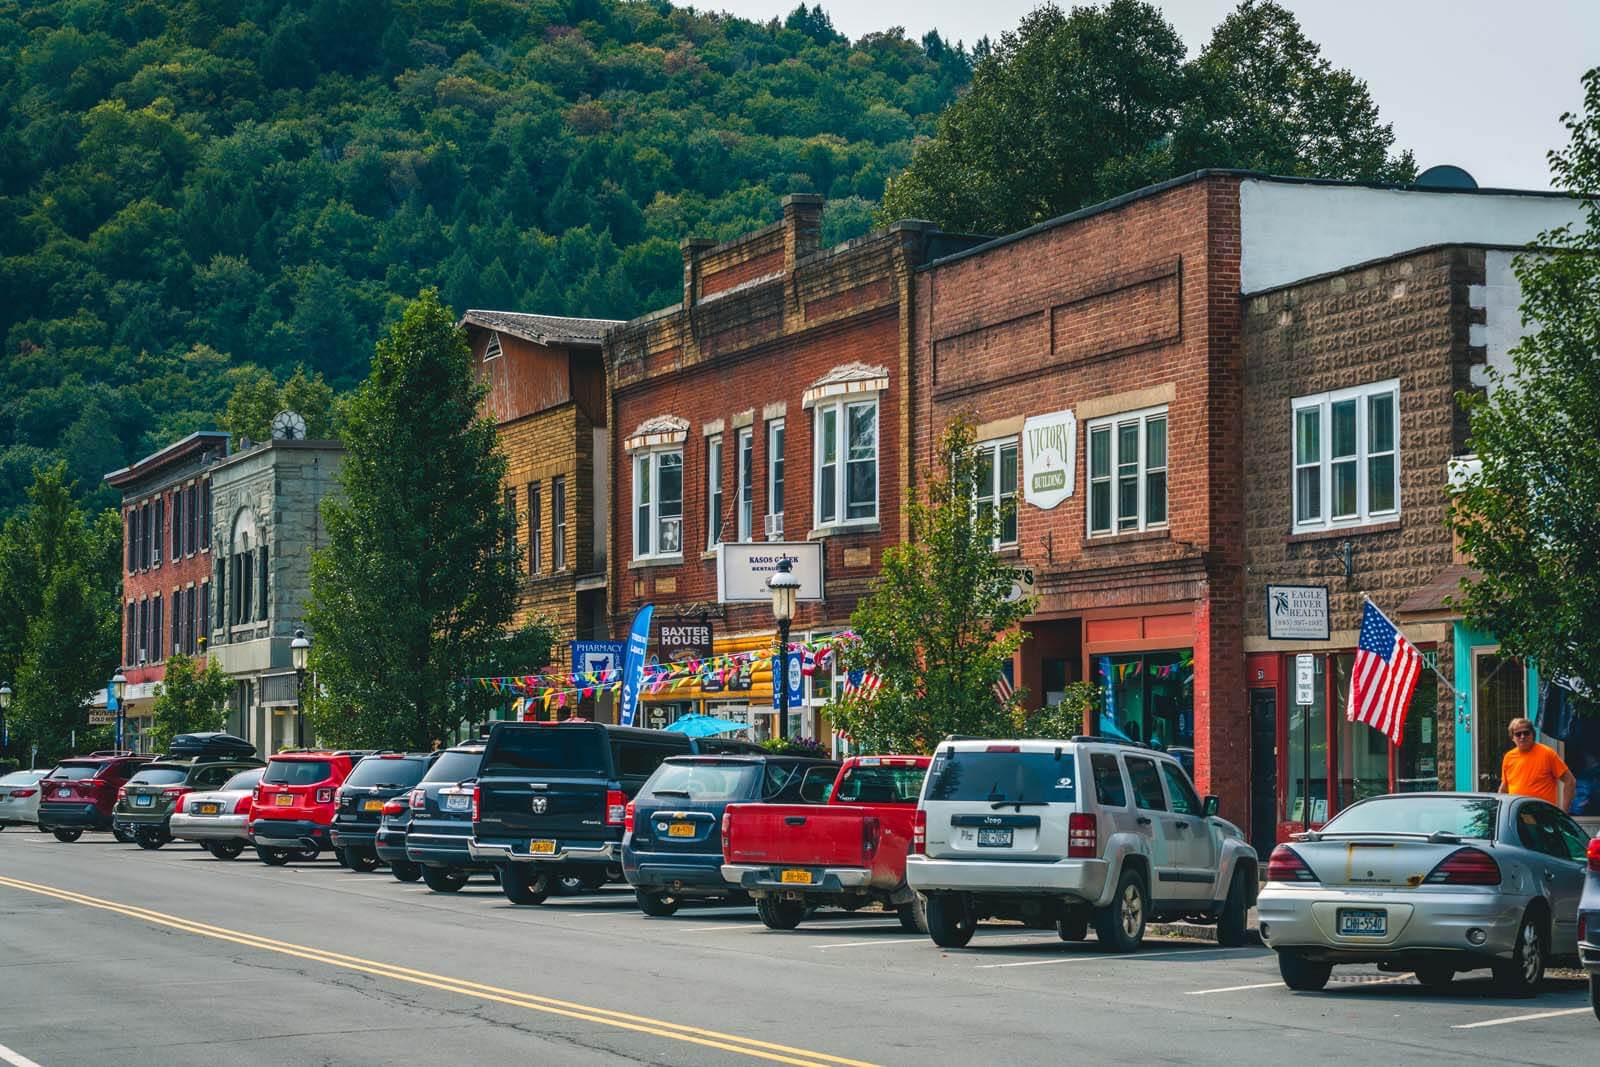 Town of Roscoe in the Catskills New York